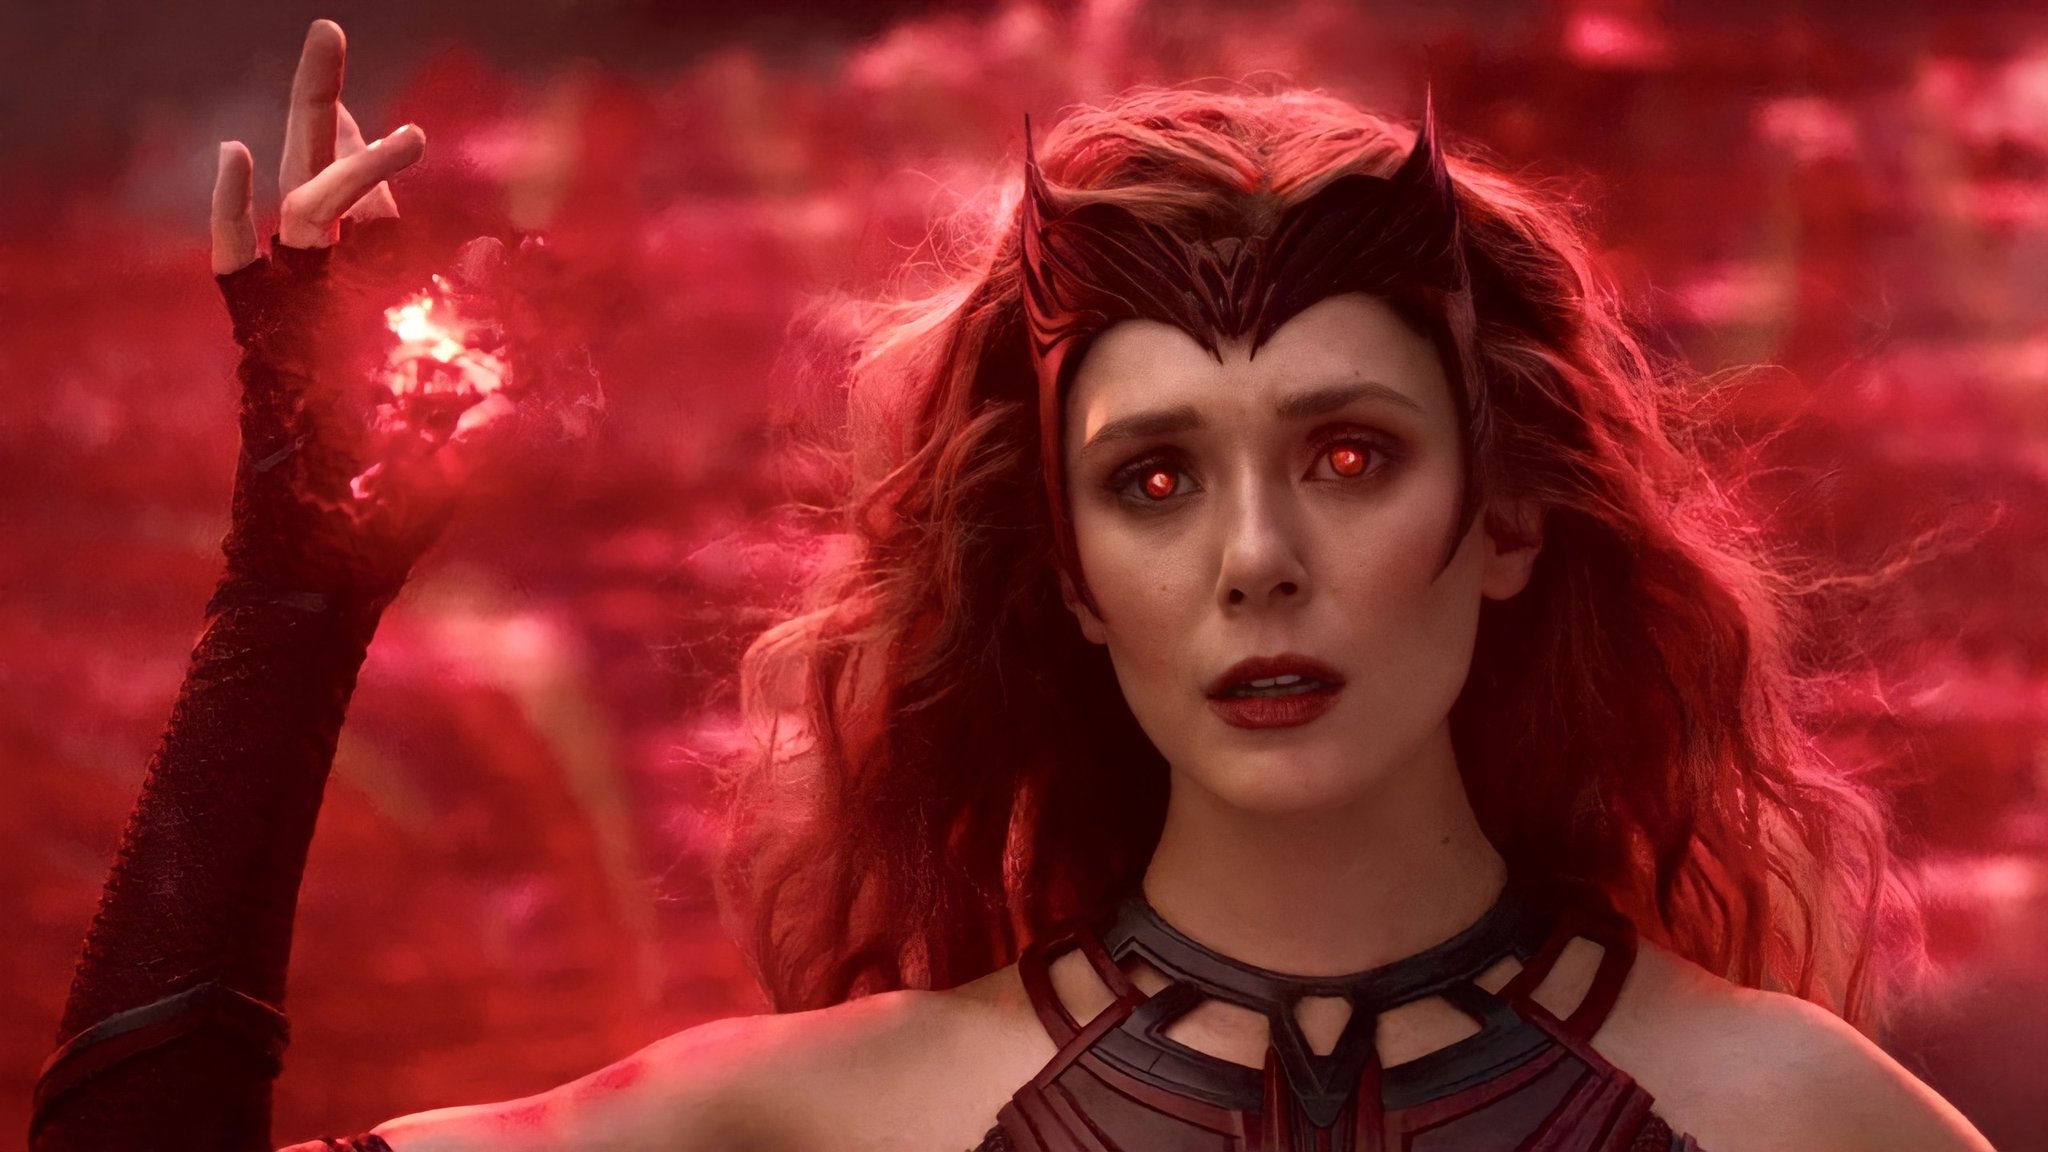 Adi ♥︎ are some HD pics of Scarlet witch. thank me later